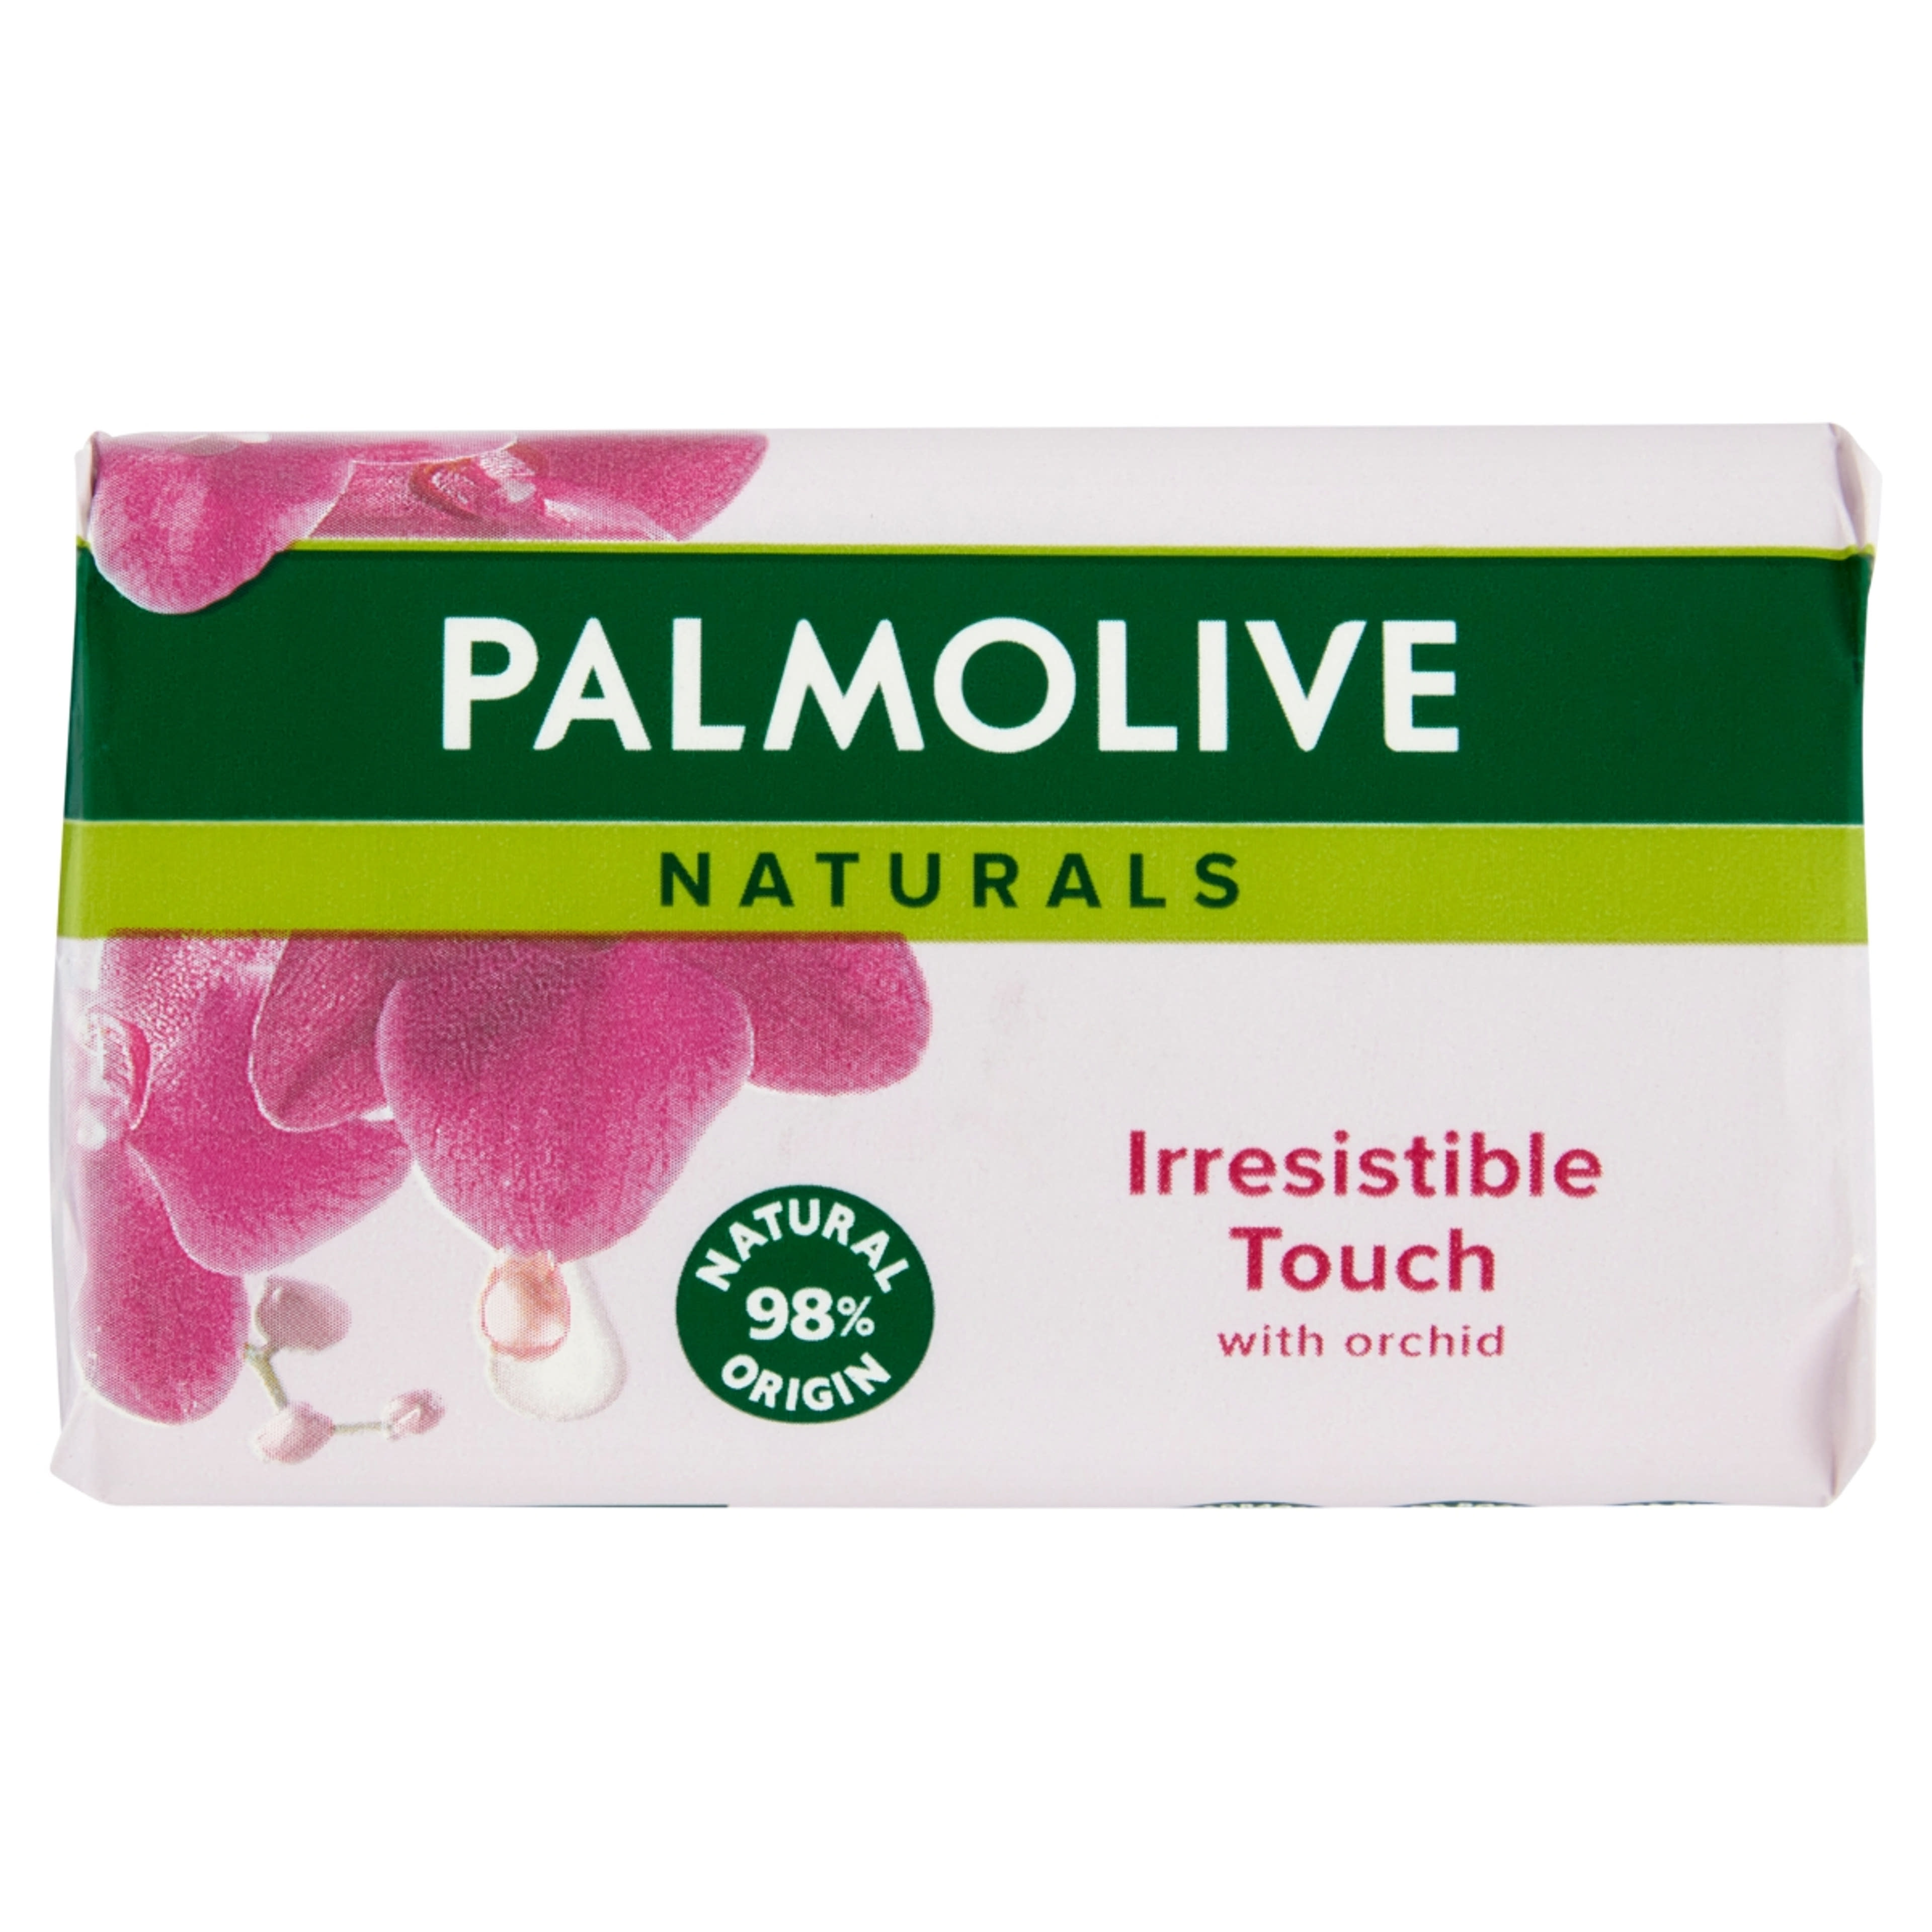 Palmolive Naturals Irresistible Touch with Orchid pipereszappan - 90 g